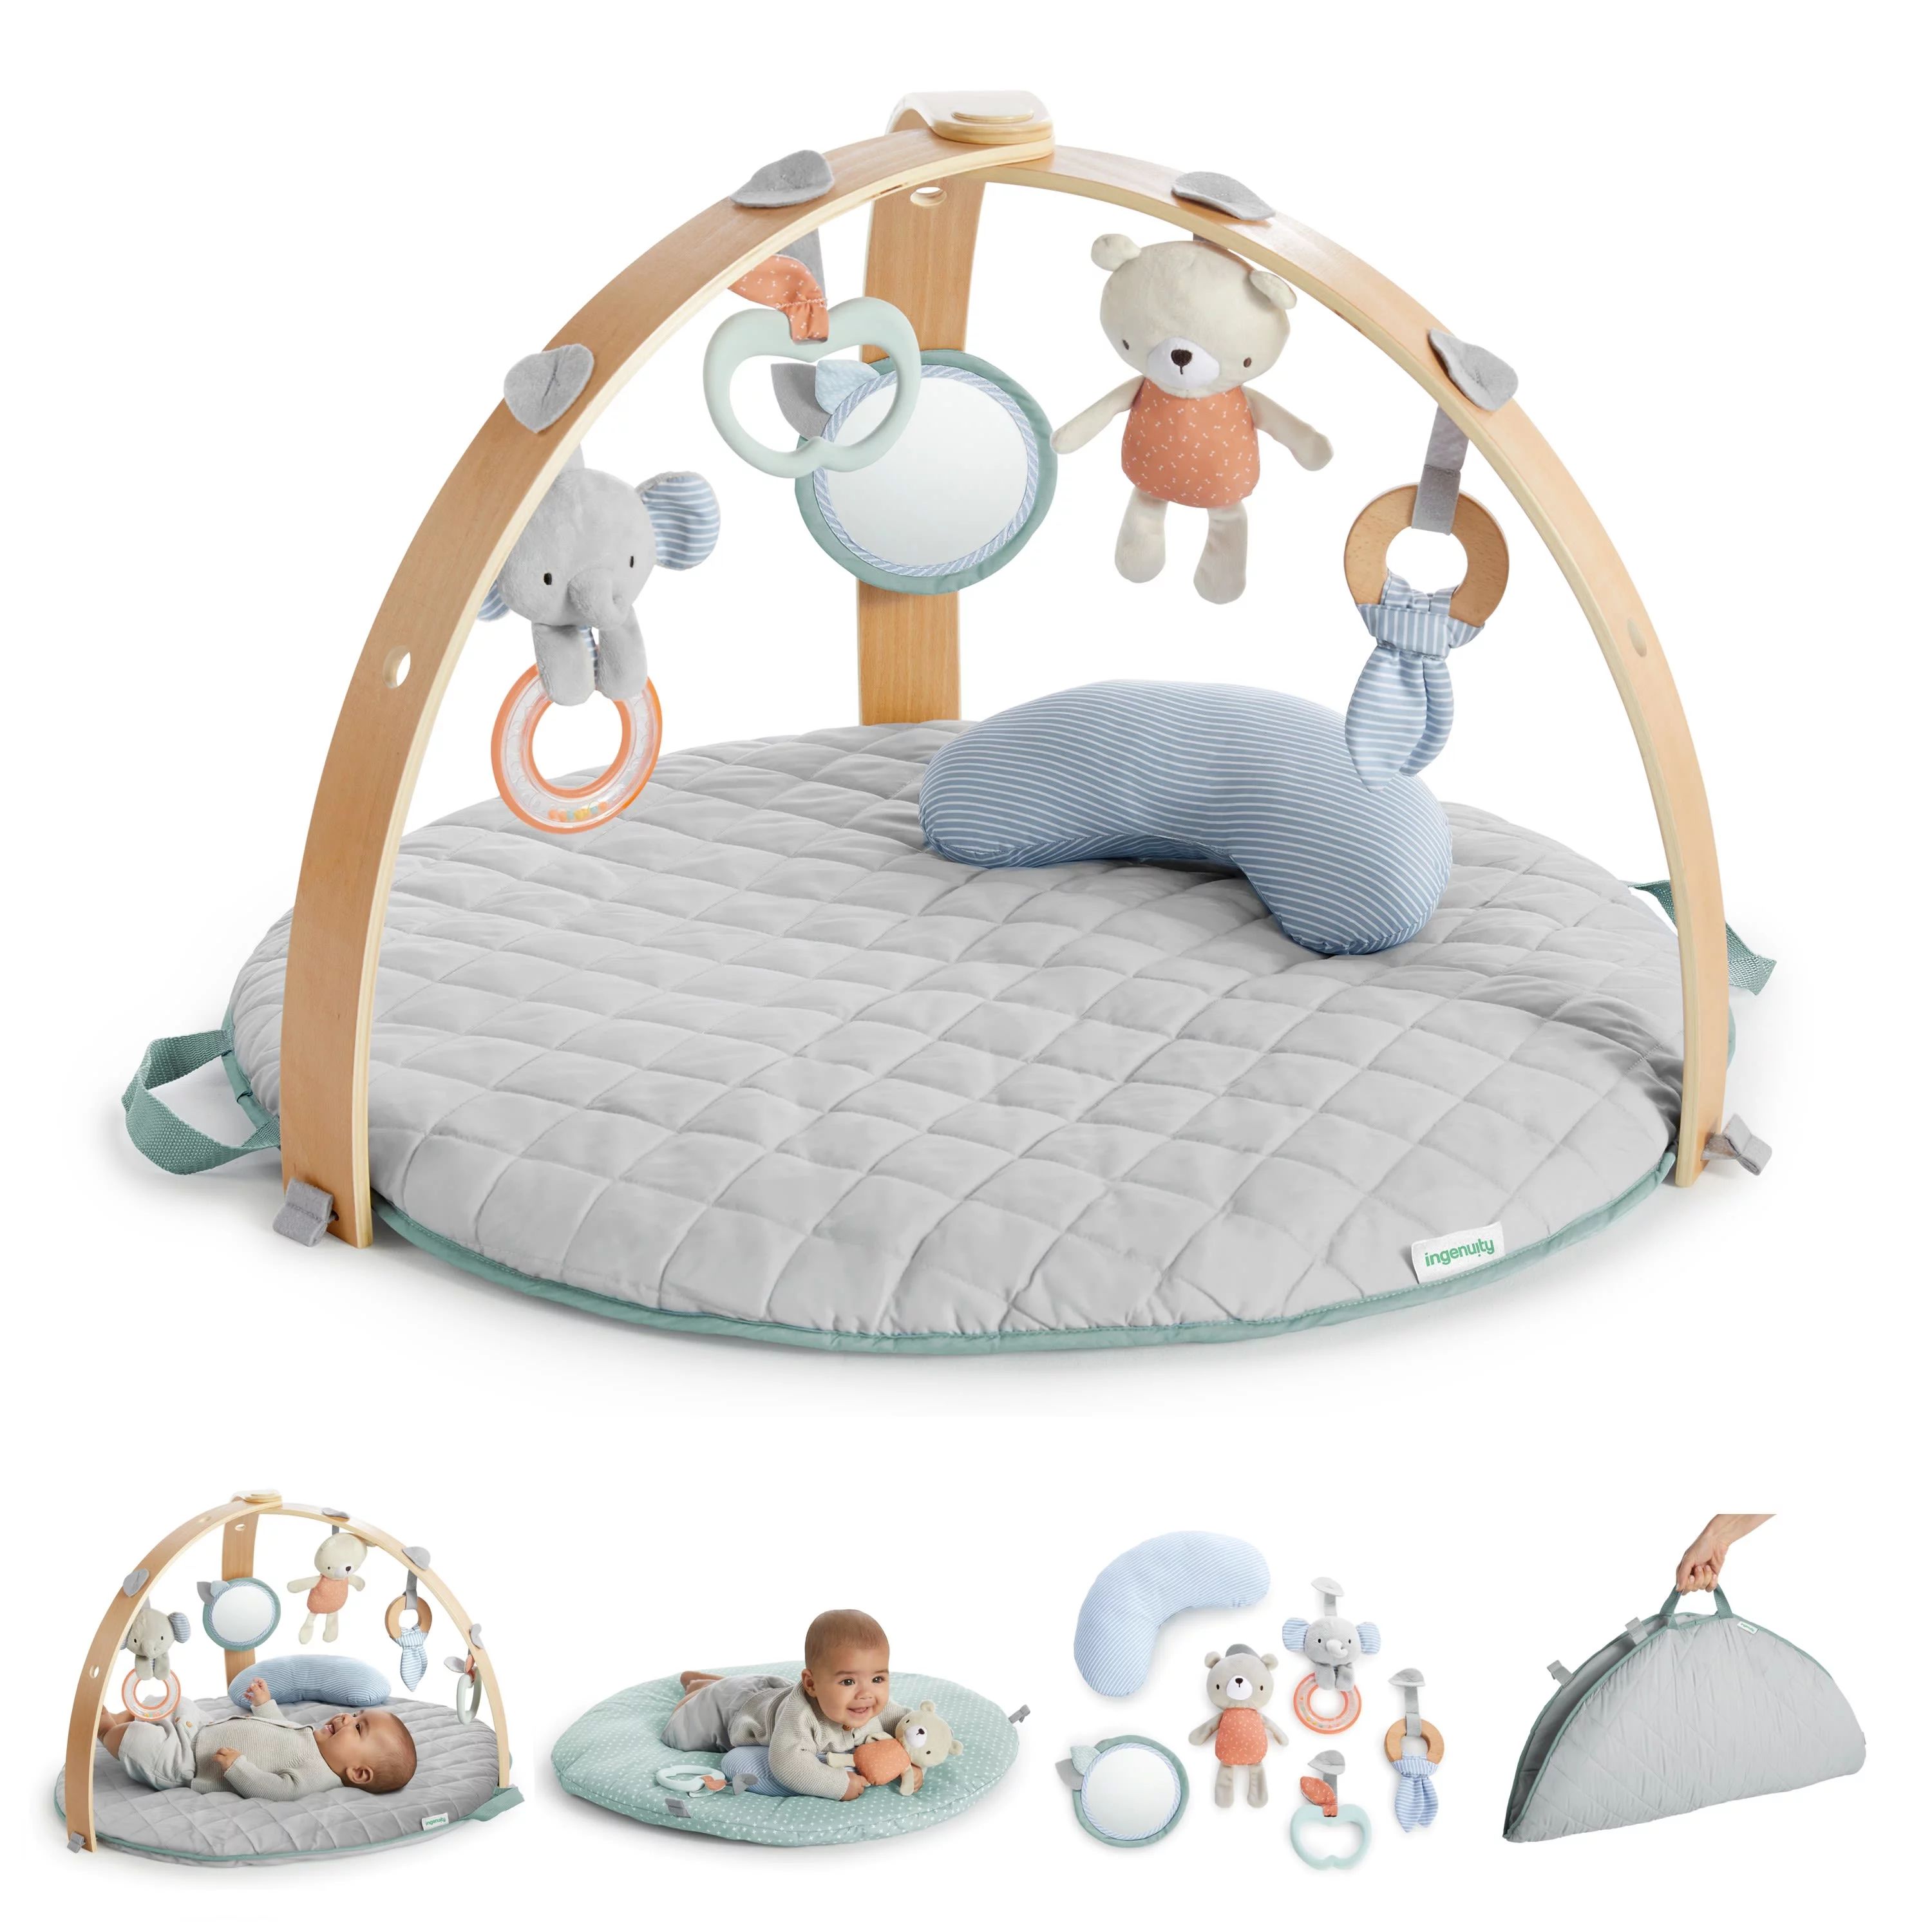 Ingenuity Cozy Spot Reversible Baby Activity Gym & Tummy Time Play Time with Self Storage | Walmart (US)